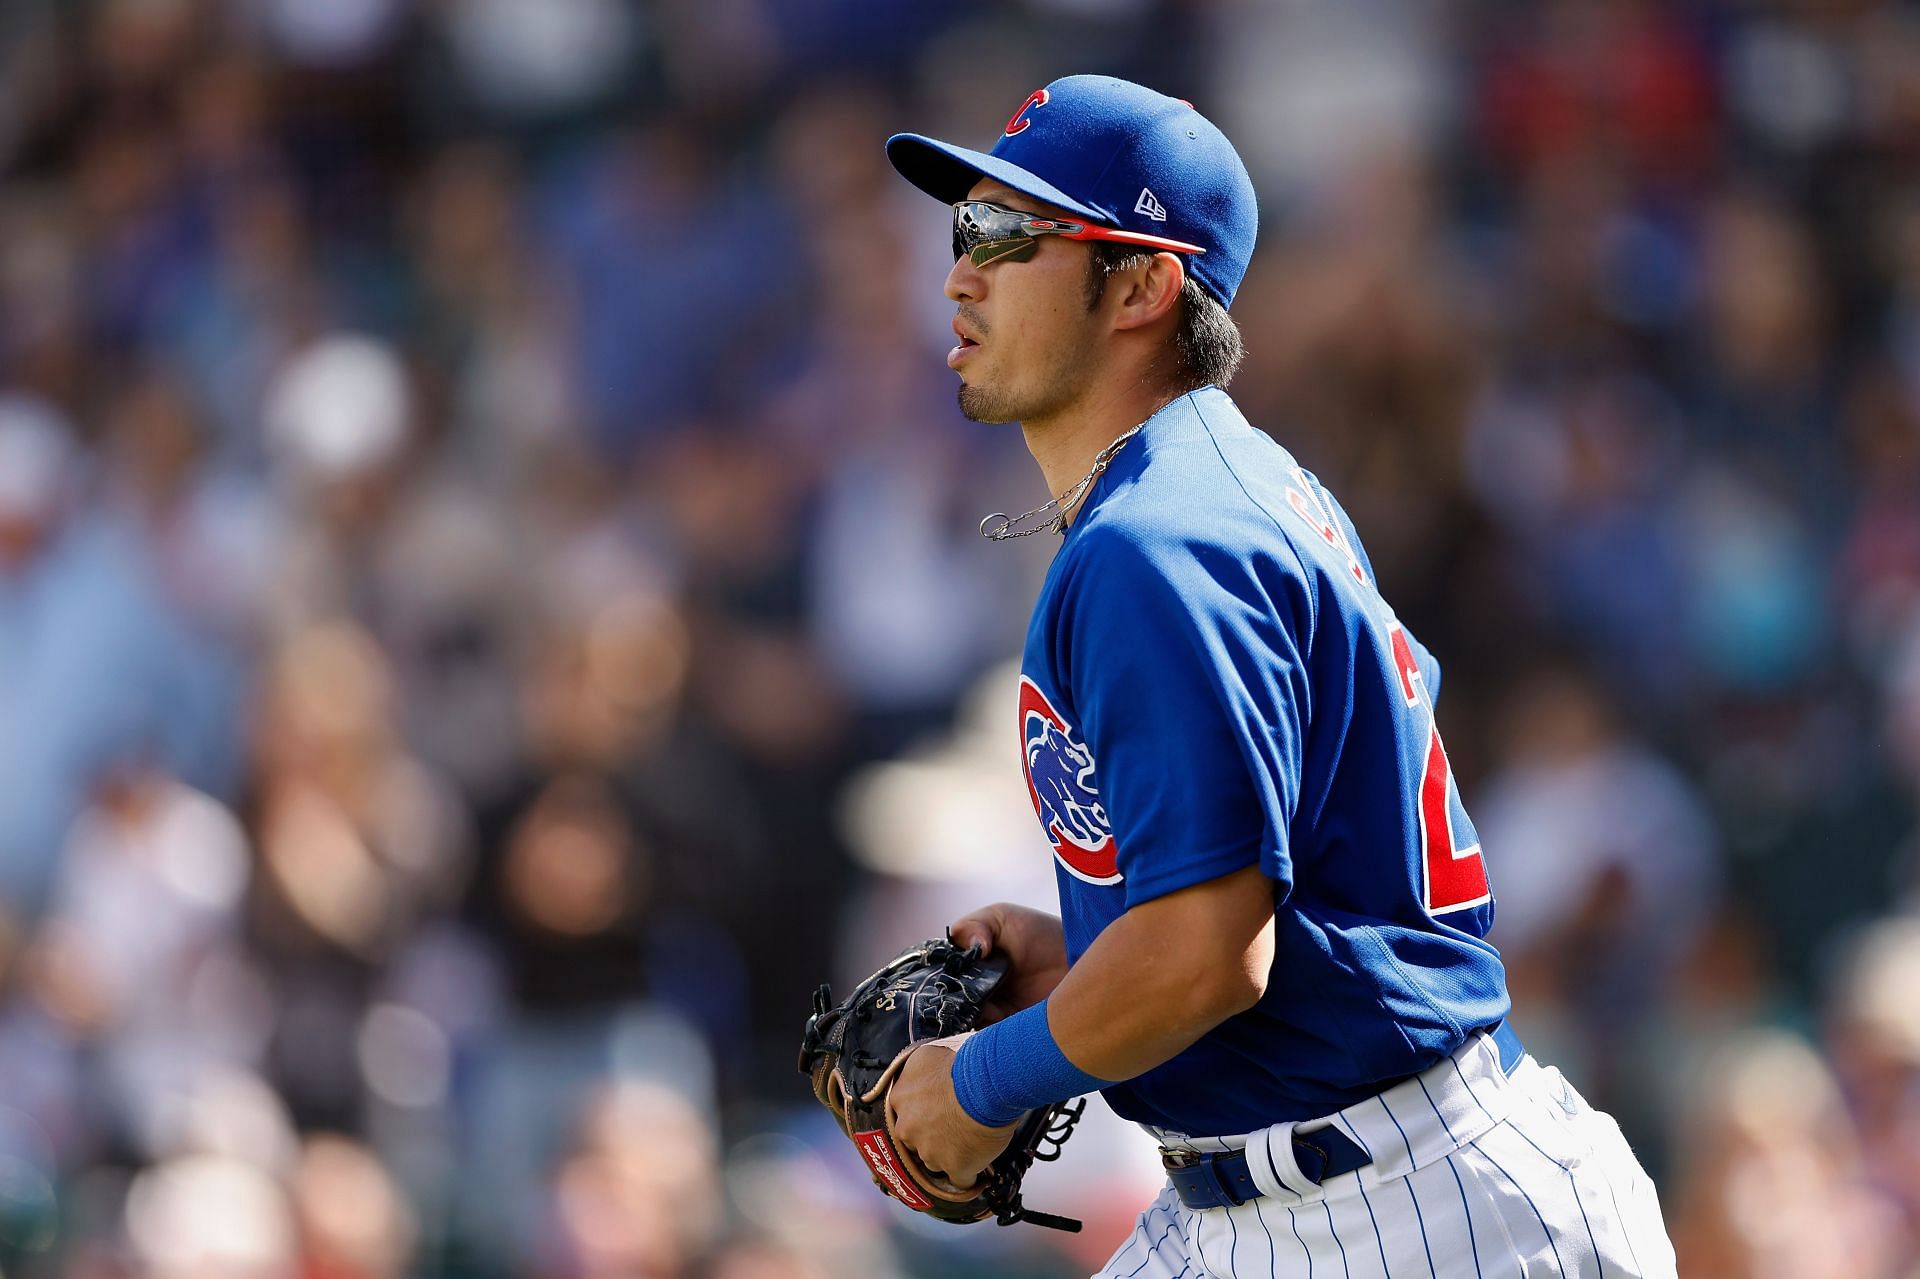 Seiya Suzuki and the Chicago Cubs will feature twice on Friday Night Baseball